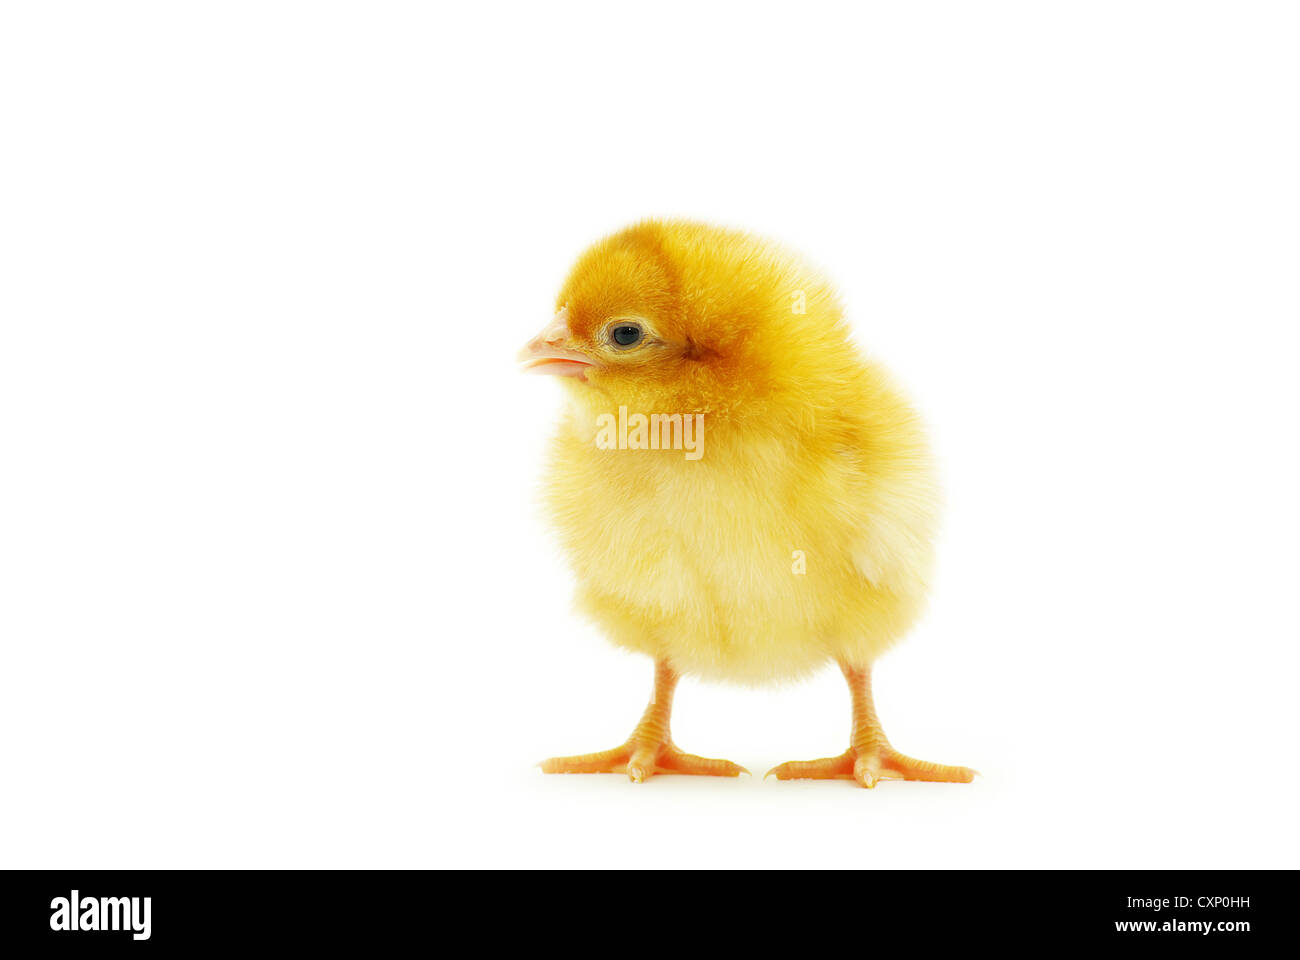 Cute little baby chicken isolated on white background Stock Photo